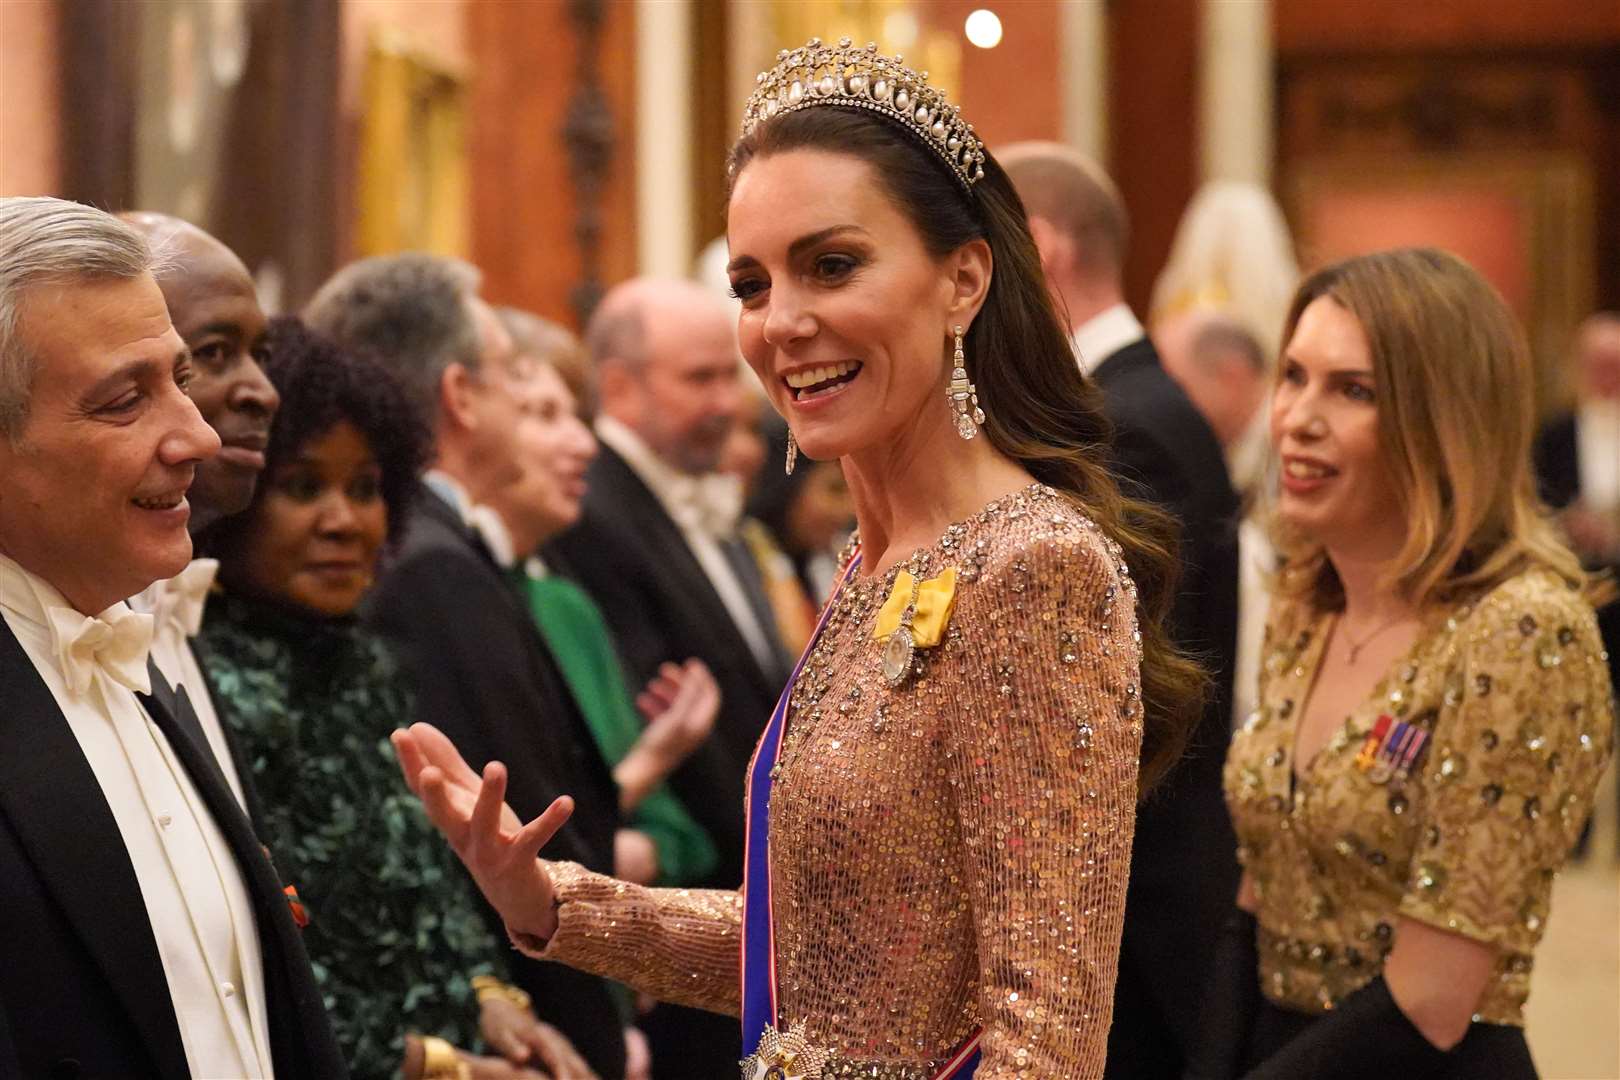 The Princess of Wales at the Diplomatic Corps reception at Buckingham Palace in December (Jonathan Brady/PA)